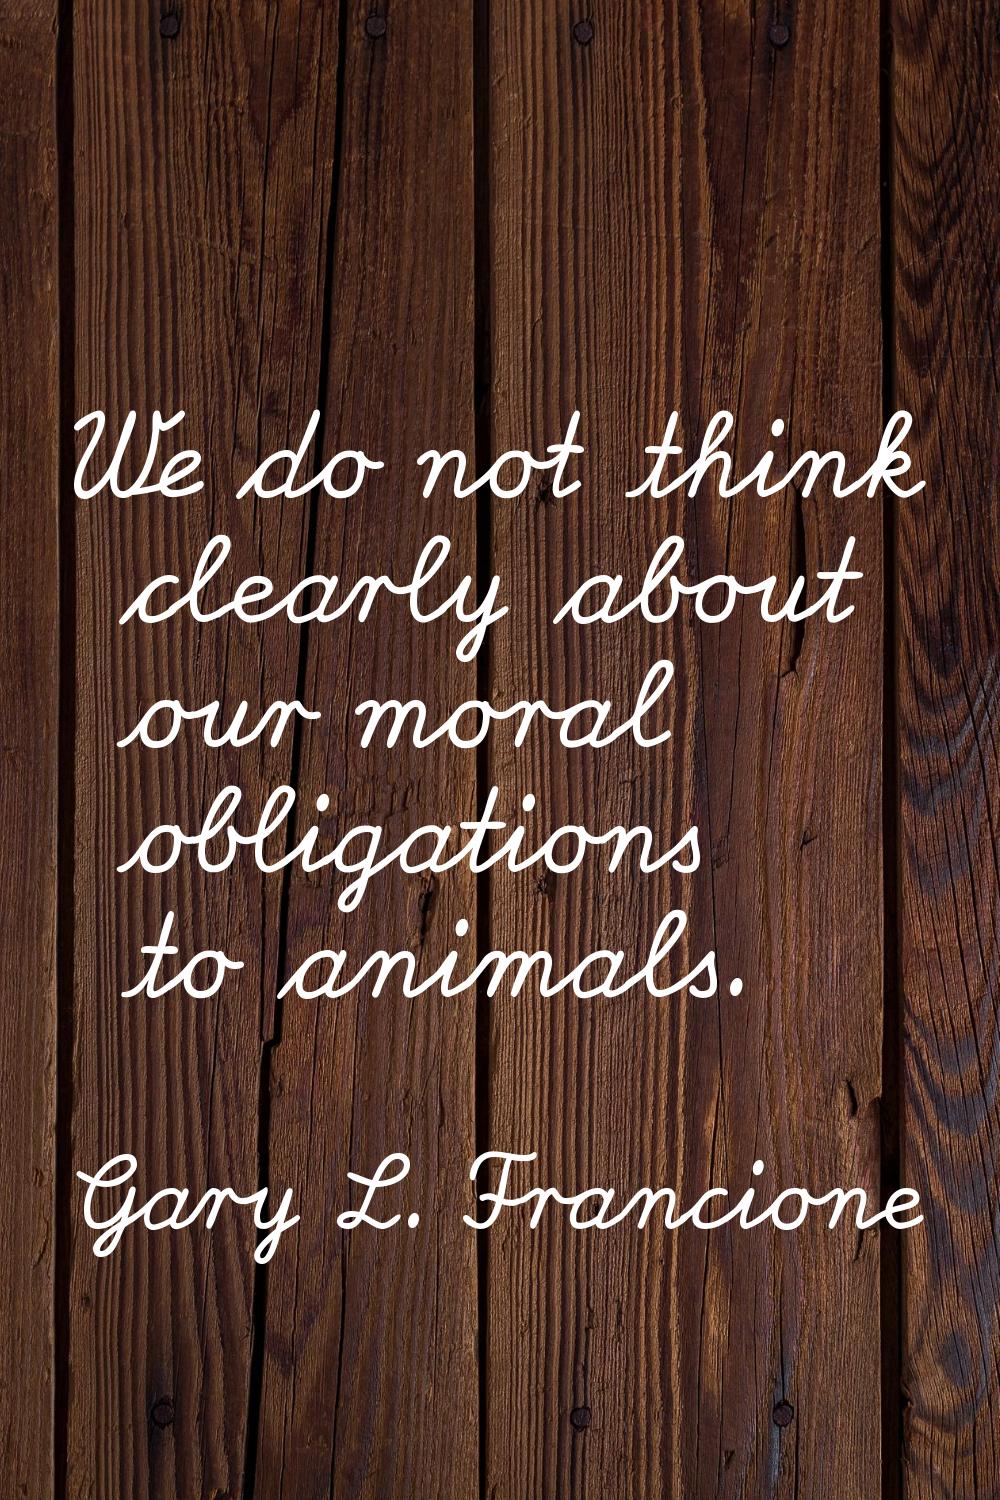 We do not think clearly about our moral obligations to animals.